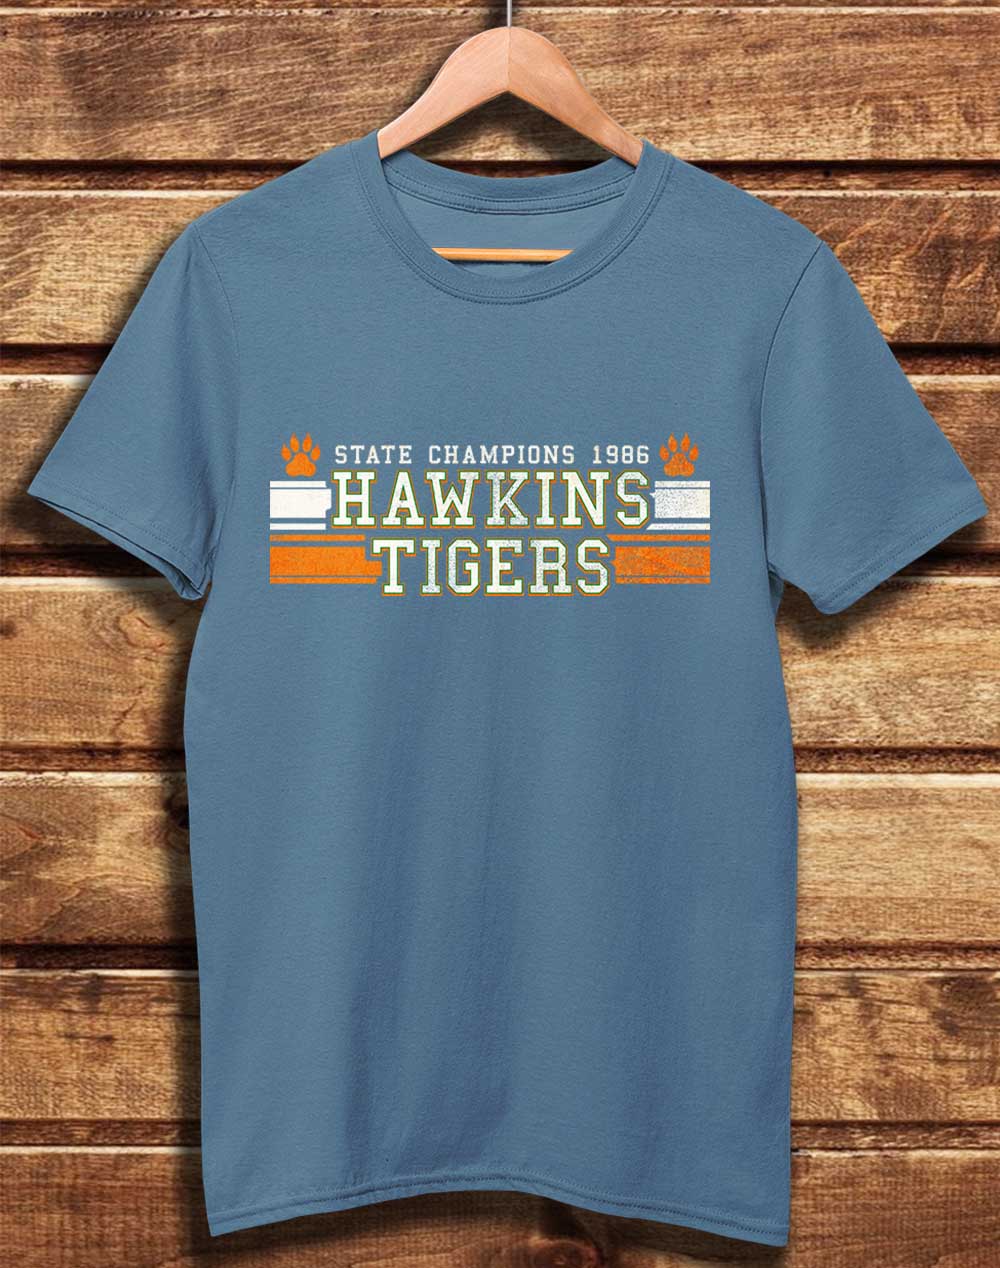 Faded Denim - DELUXE Hawkins Tigers State Champs 1986 Organic Cotton T-Shirt